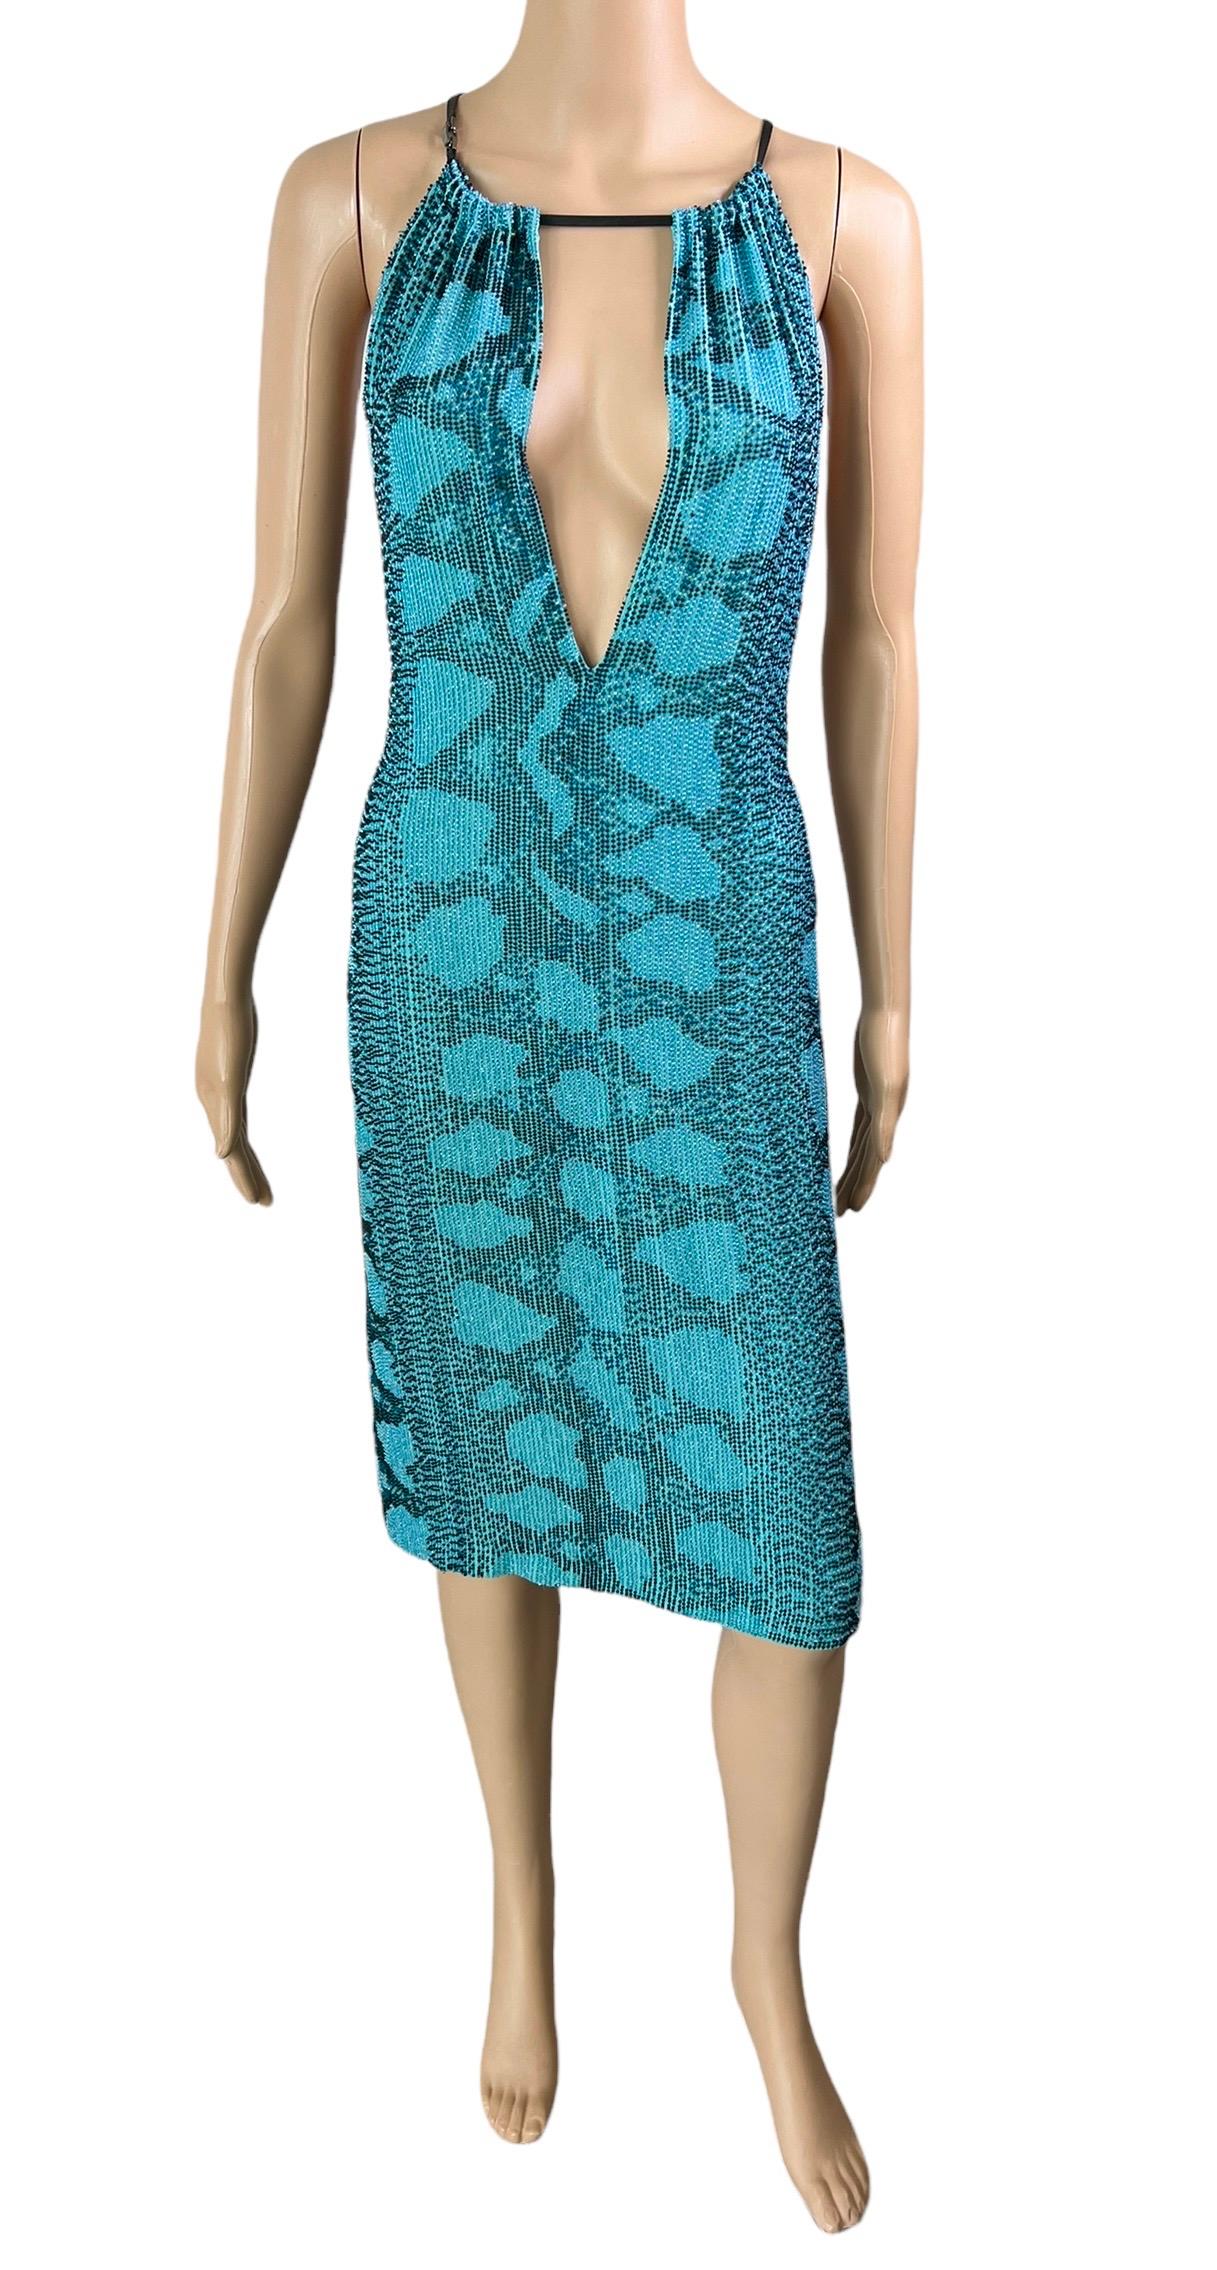 Blue Tom Ford for Gucci S/S 2000 Runway Embellished Plunging Python Print Midi Dress